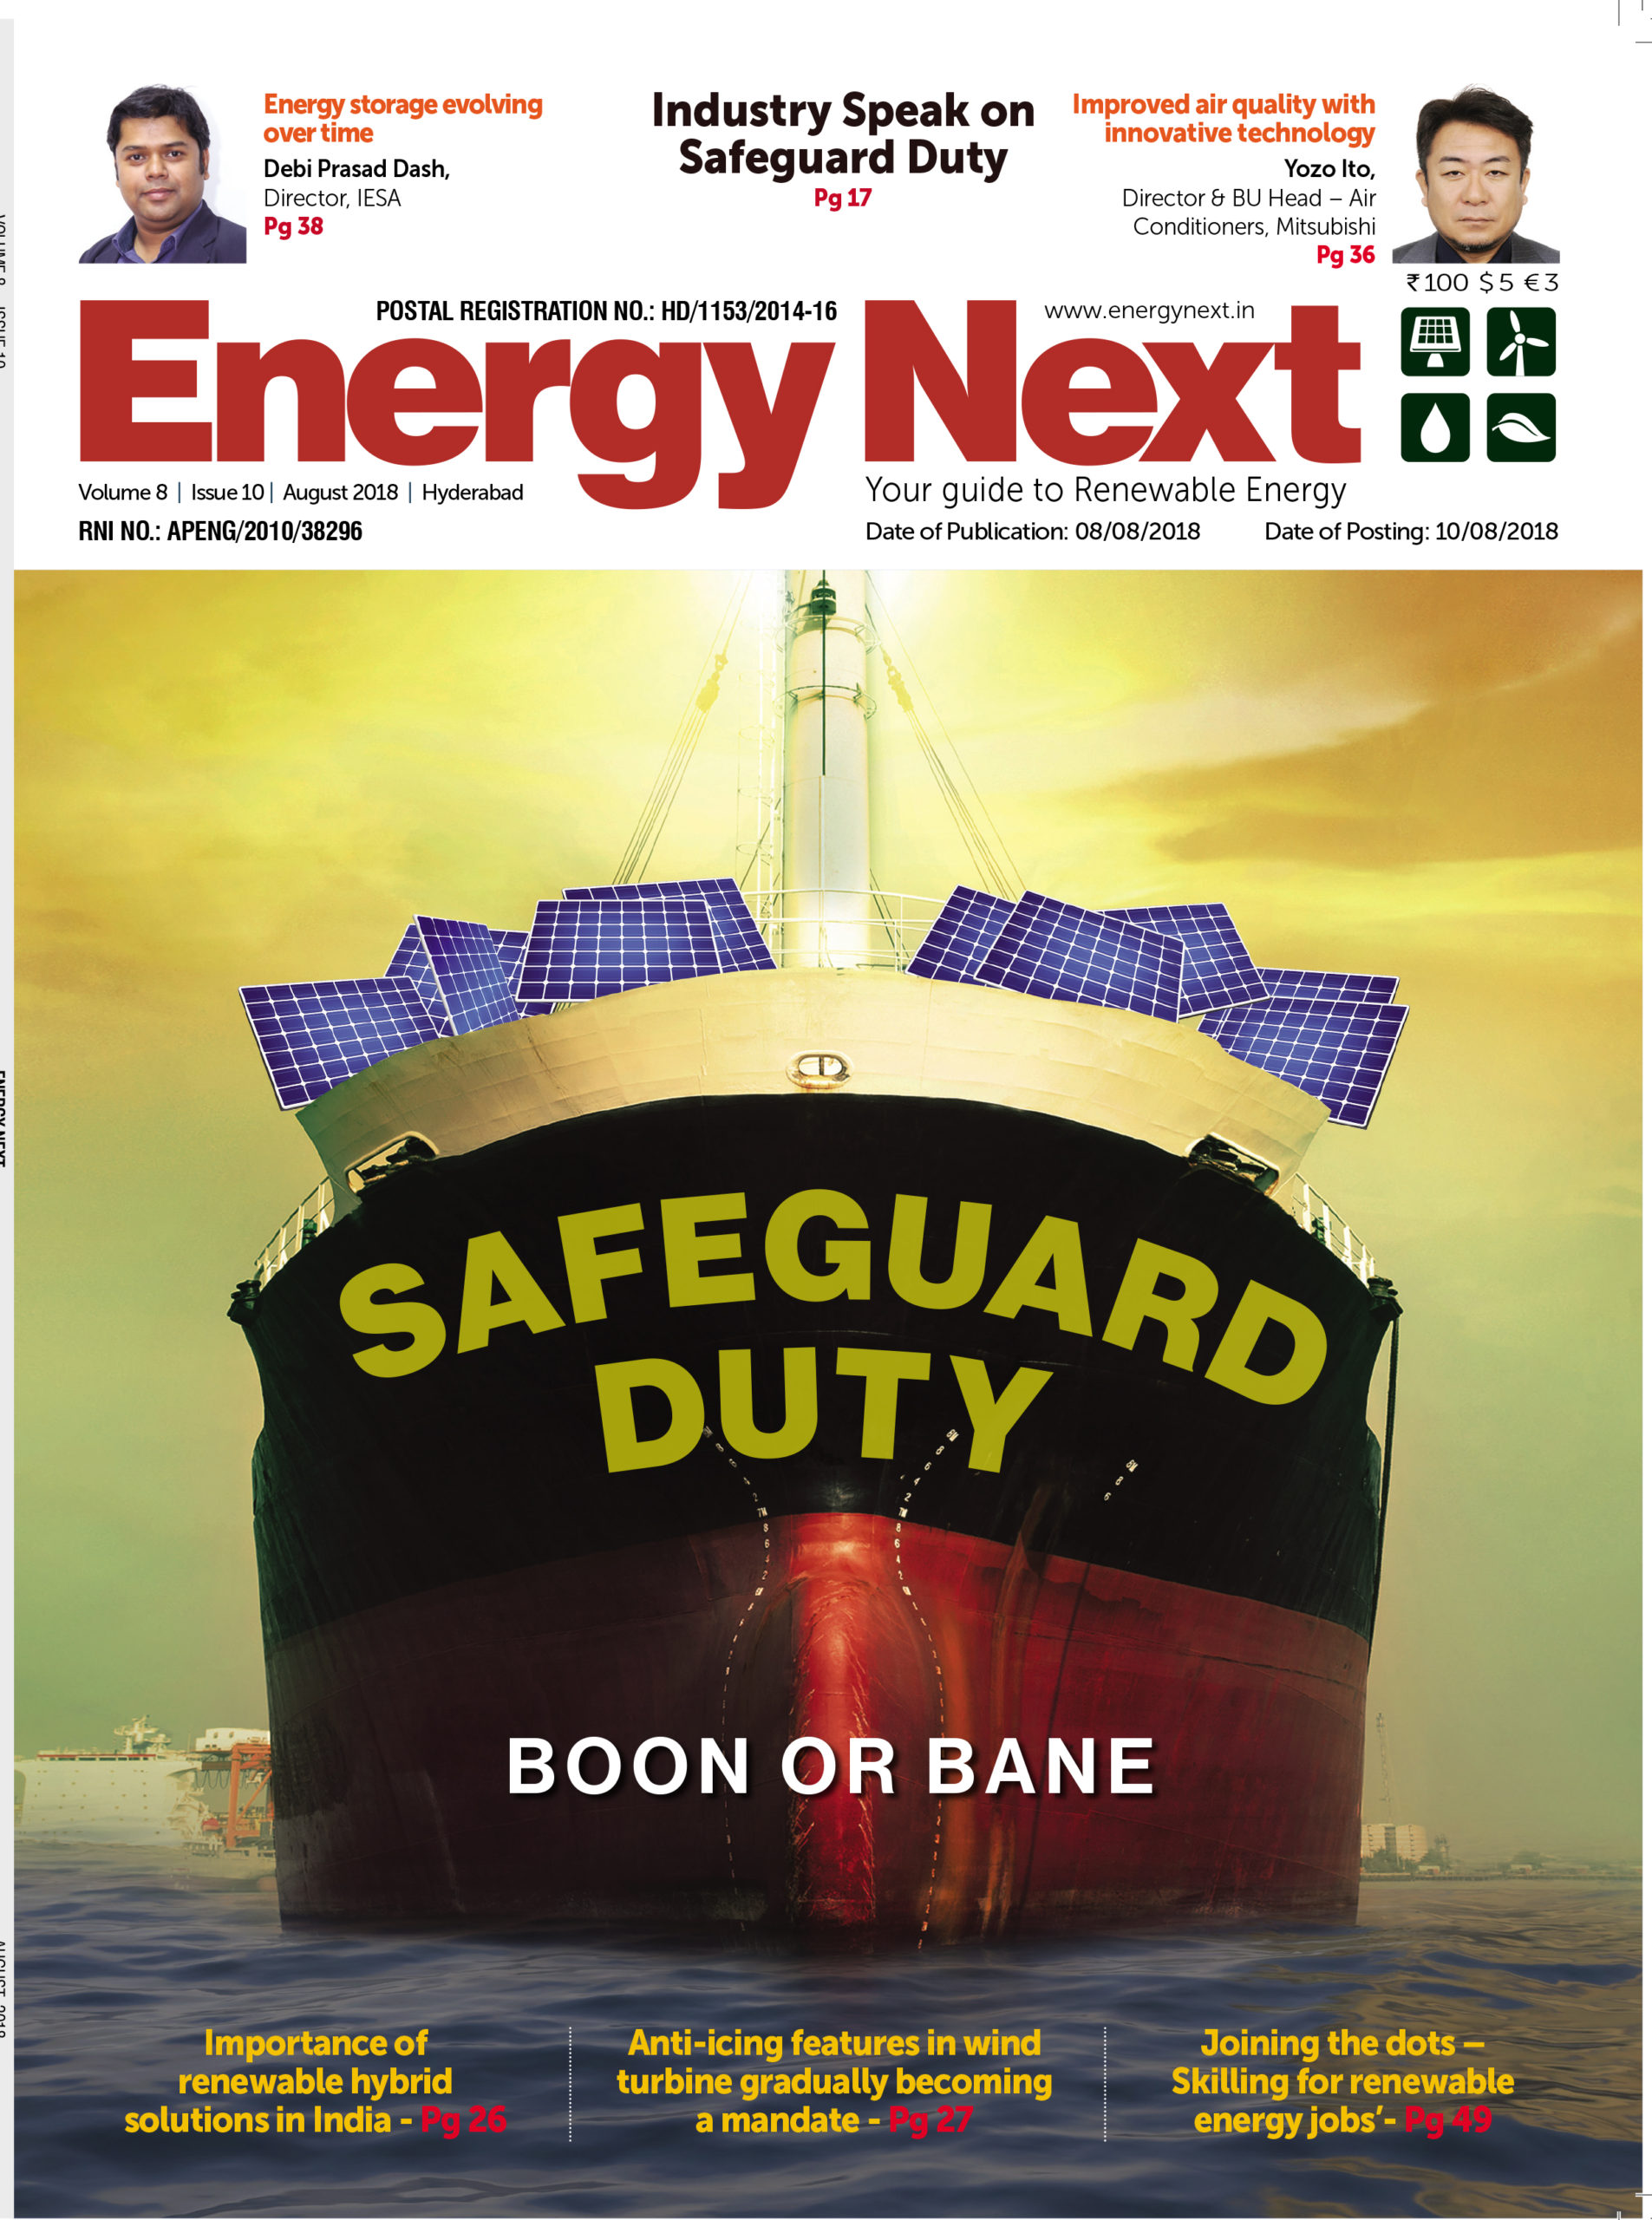 EnergyNext volume 8 issue 10 aug 2018 scaled